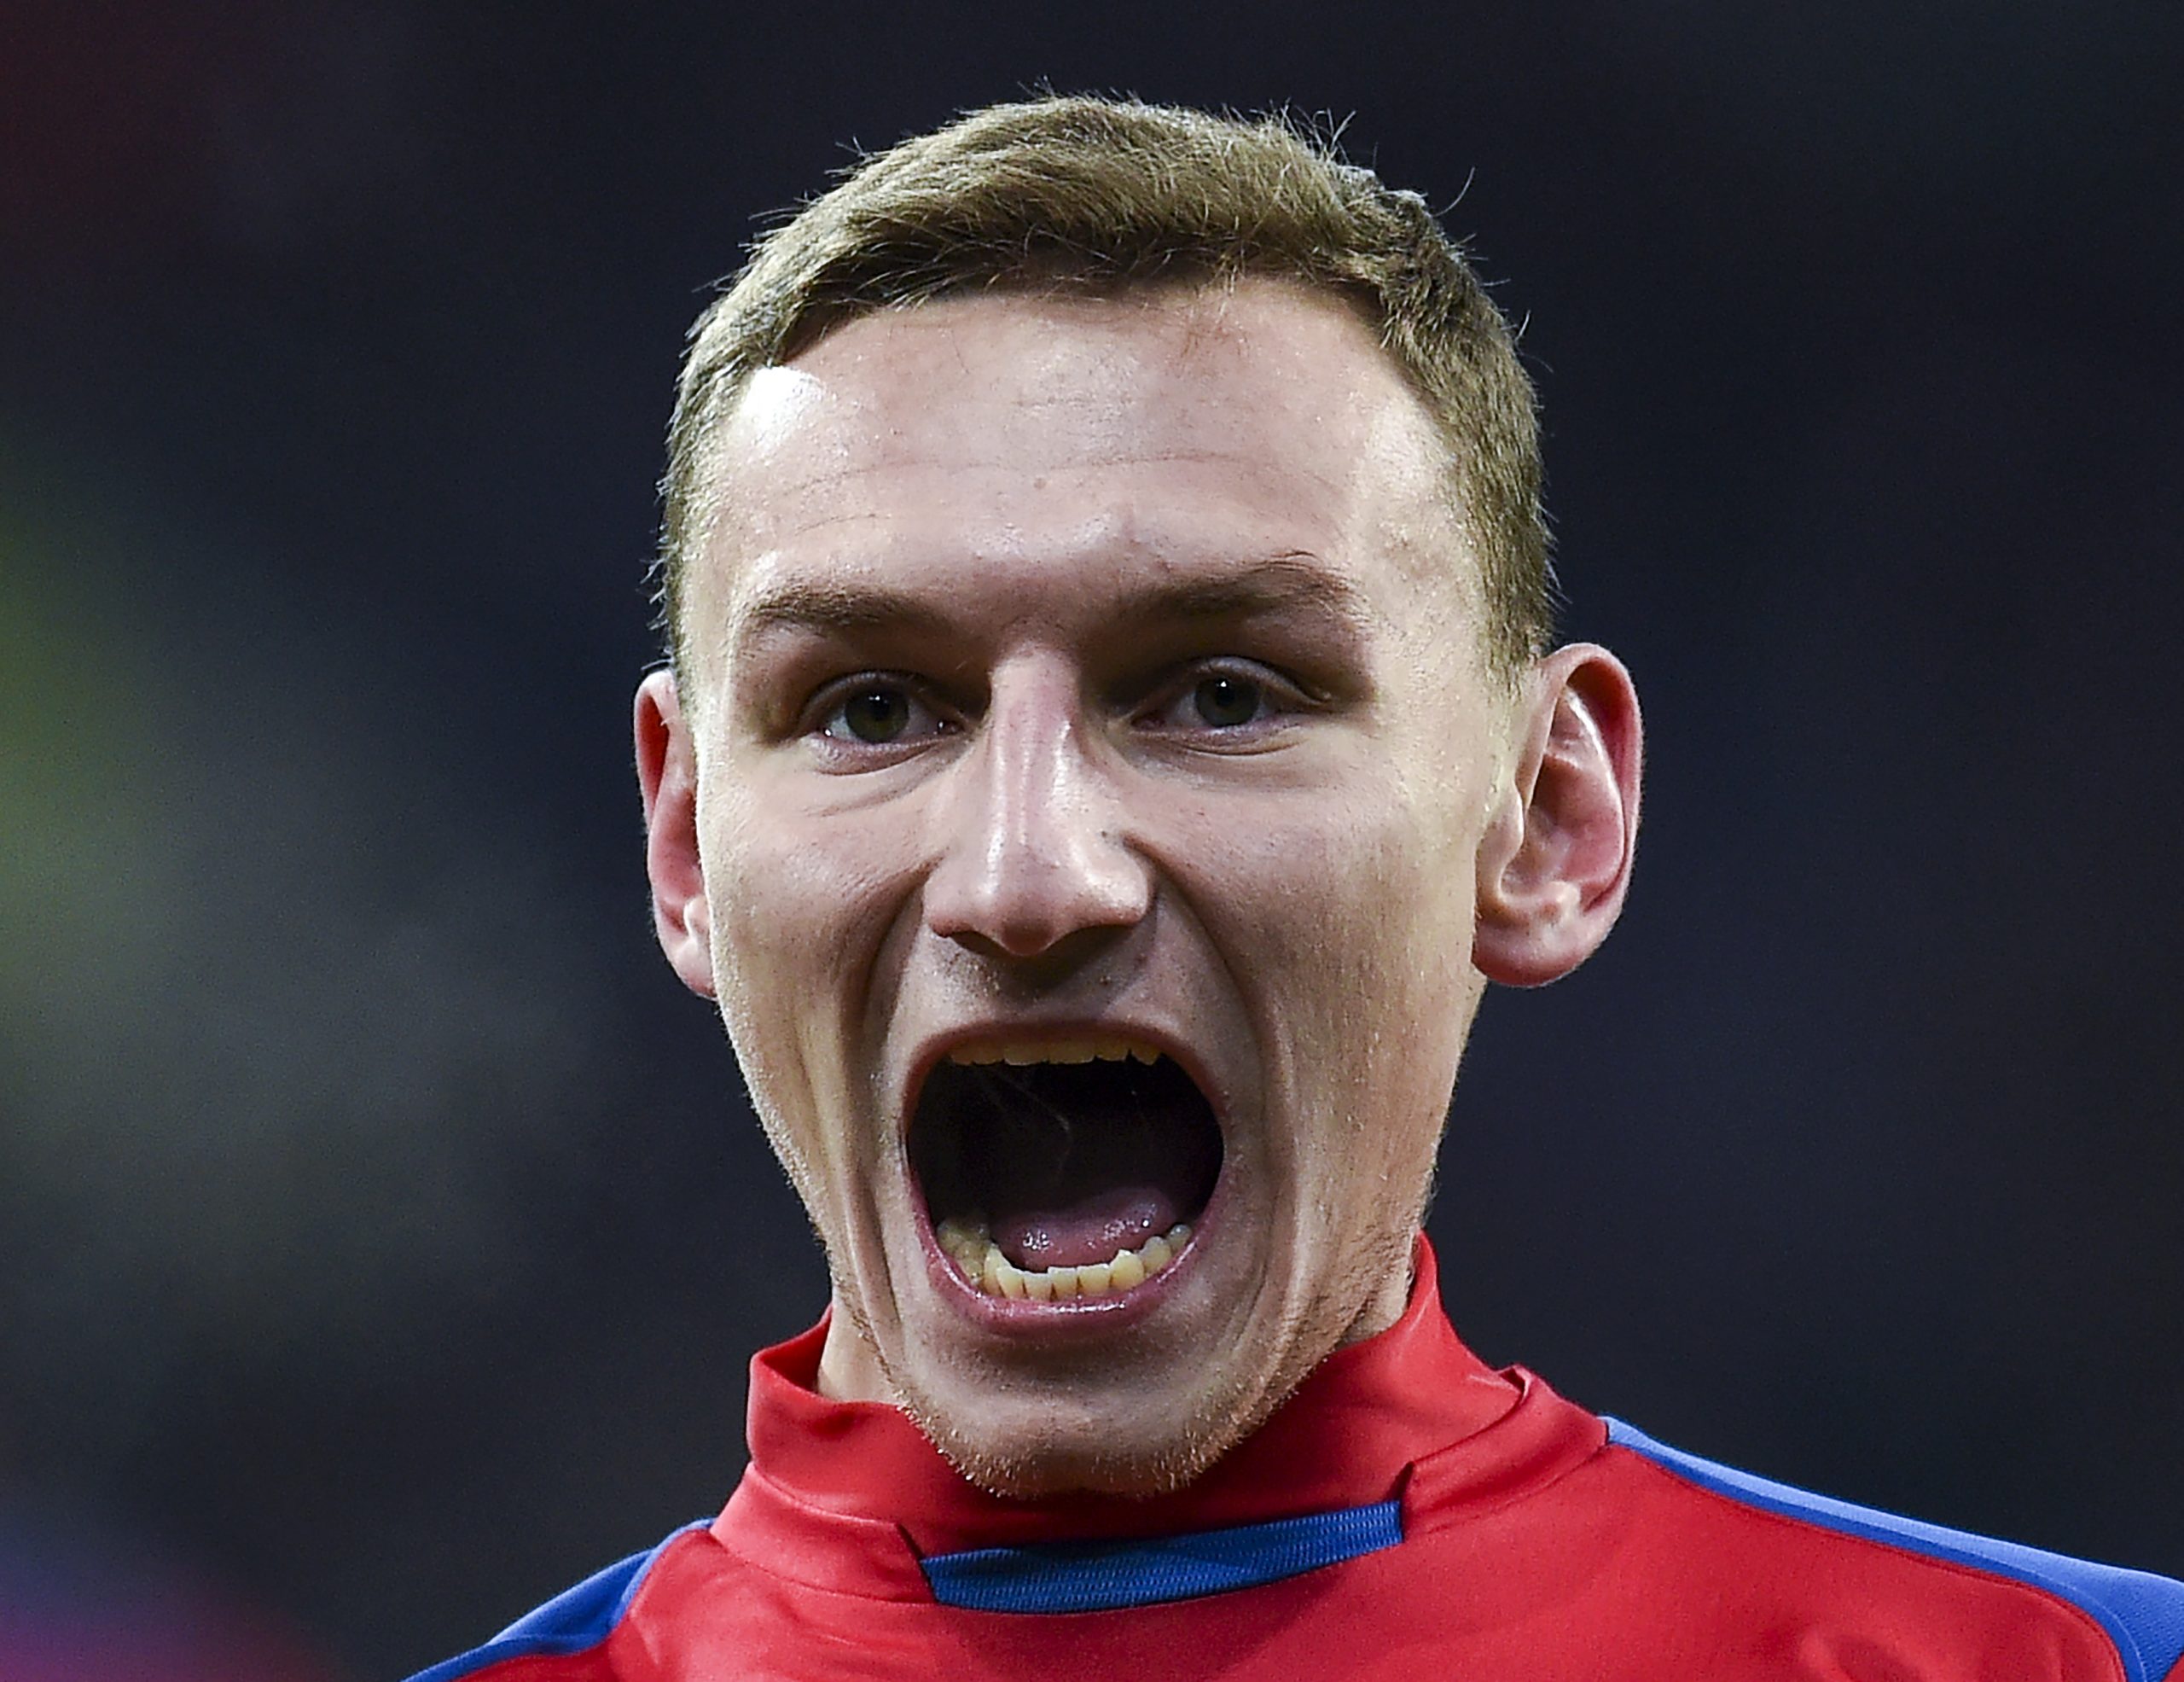 Fyodor Chalov of PFC CSKA Moscow celebrates after scoring a goal during the Russian Premier League match between PFC CSKA Moscow and FC Zenit Saint Petersburg at the VEB Arena Stadium on November 11, 2018 in Moscow, Russia. (Photo by Epsilon/Getty Images)